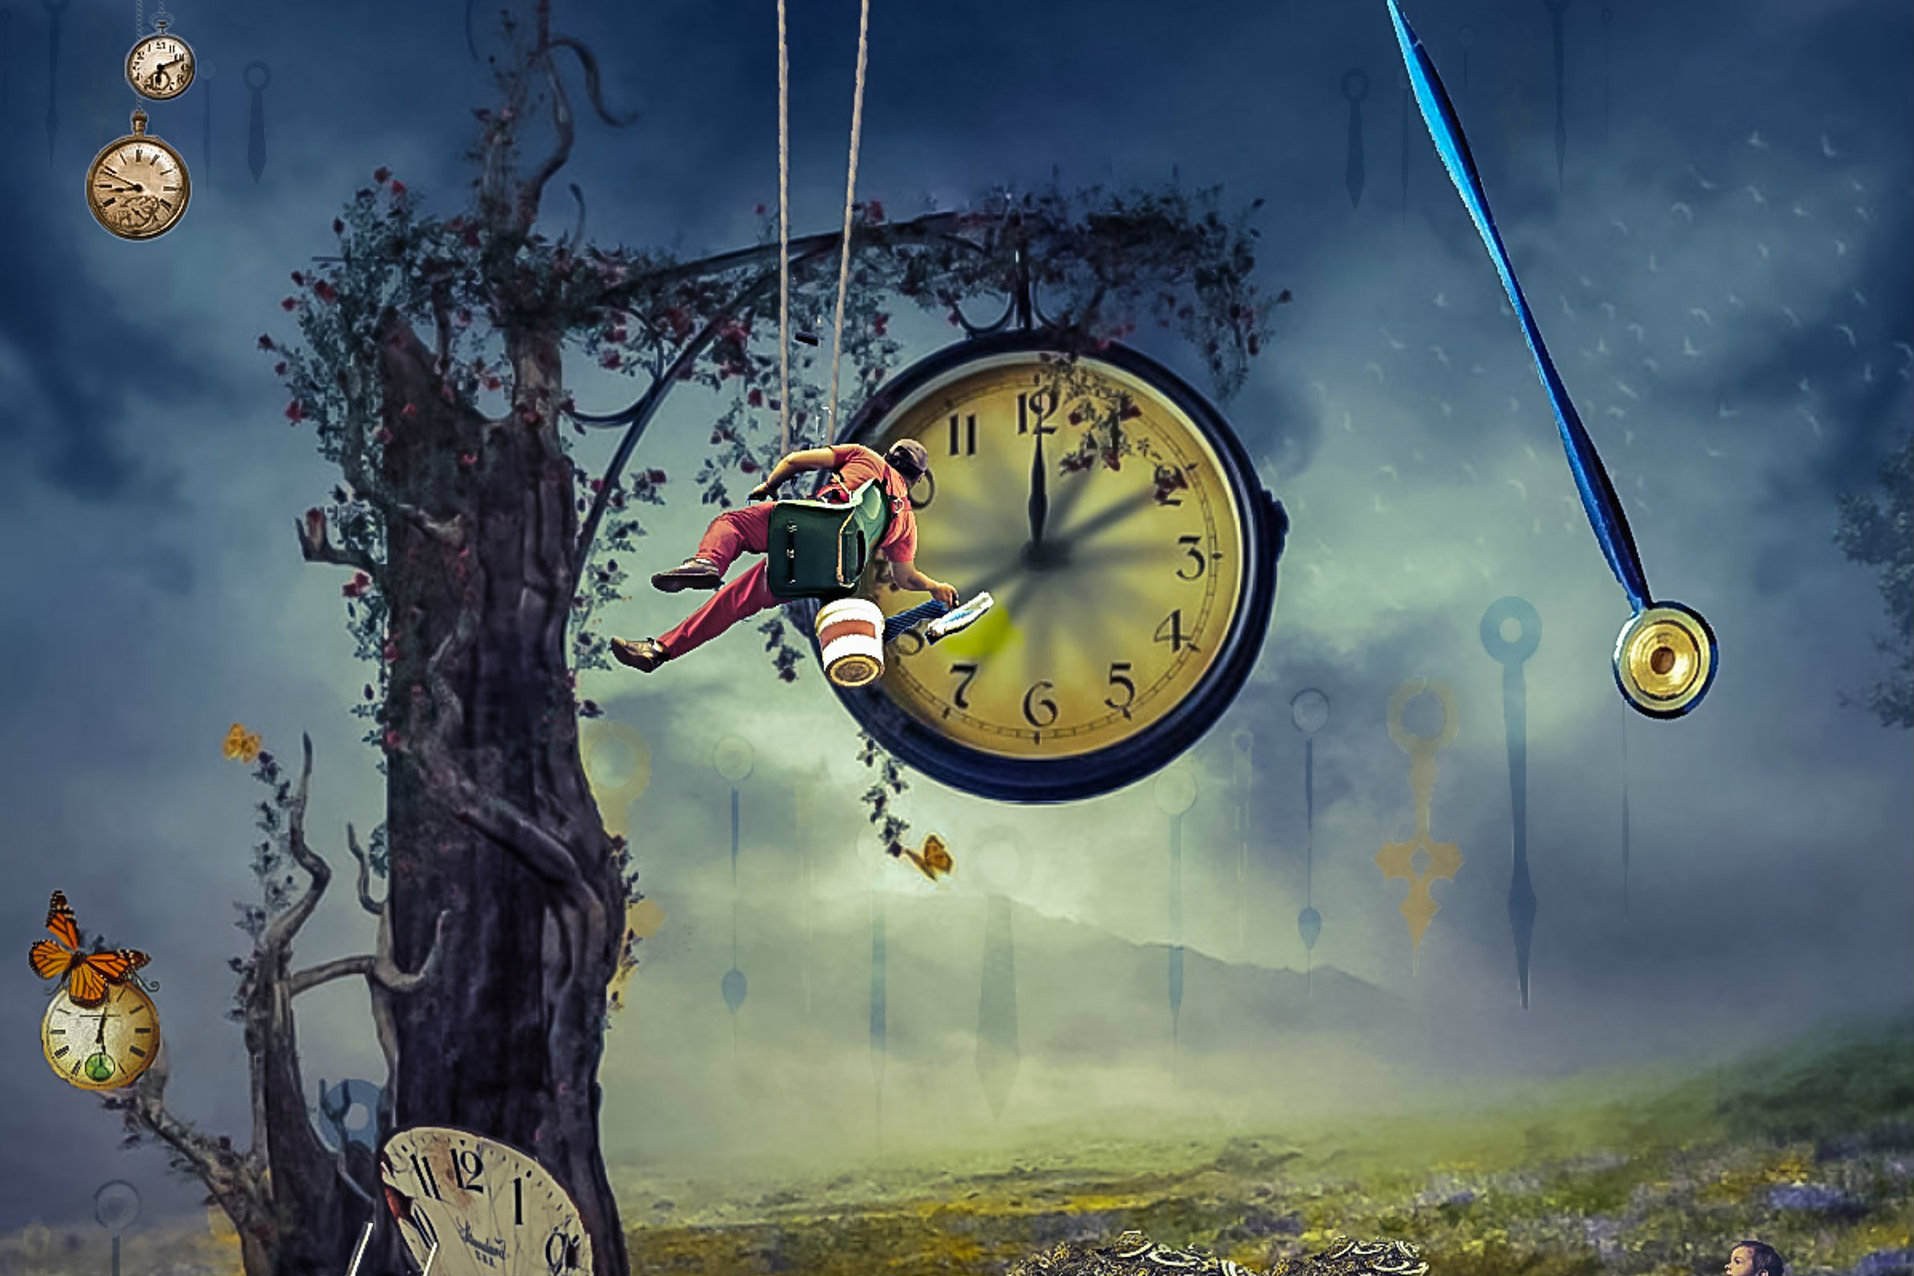 Fairy tale illustration with a tree and a platform clock which is painted by a man on a swing